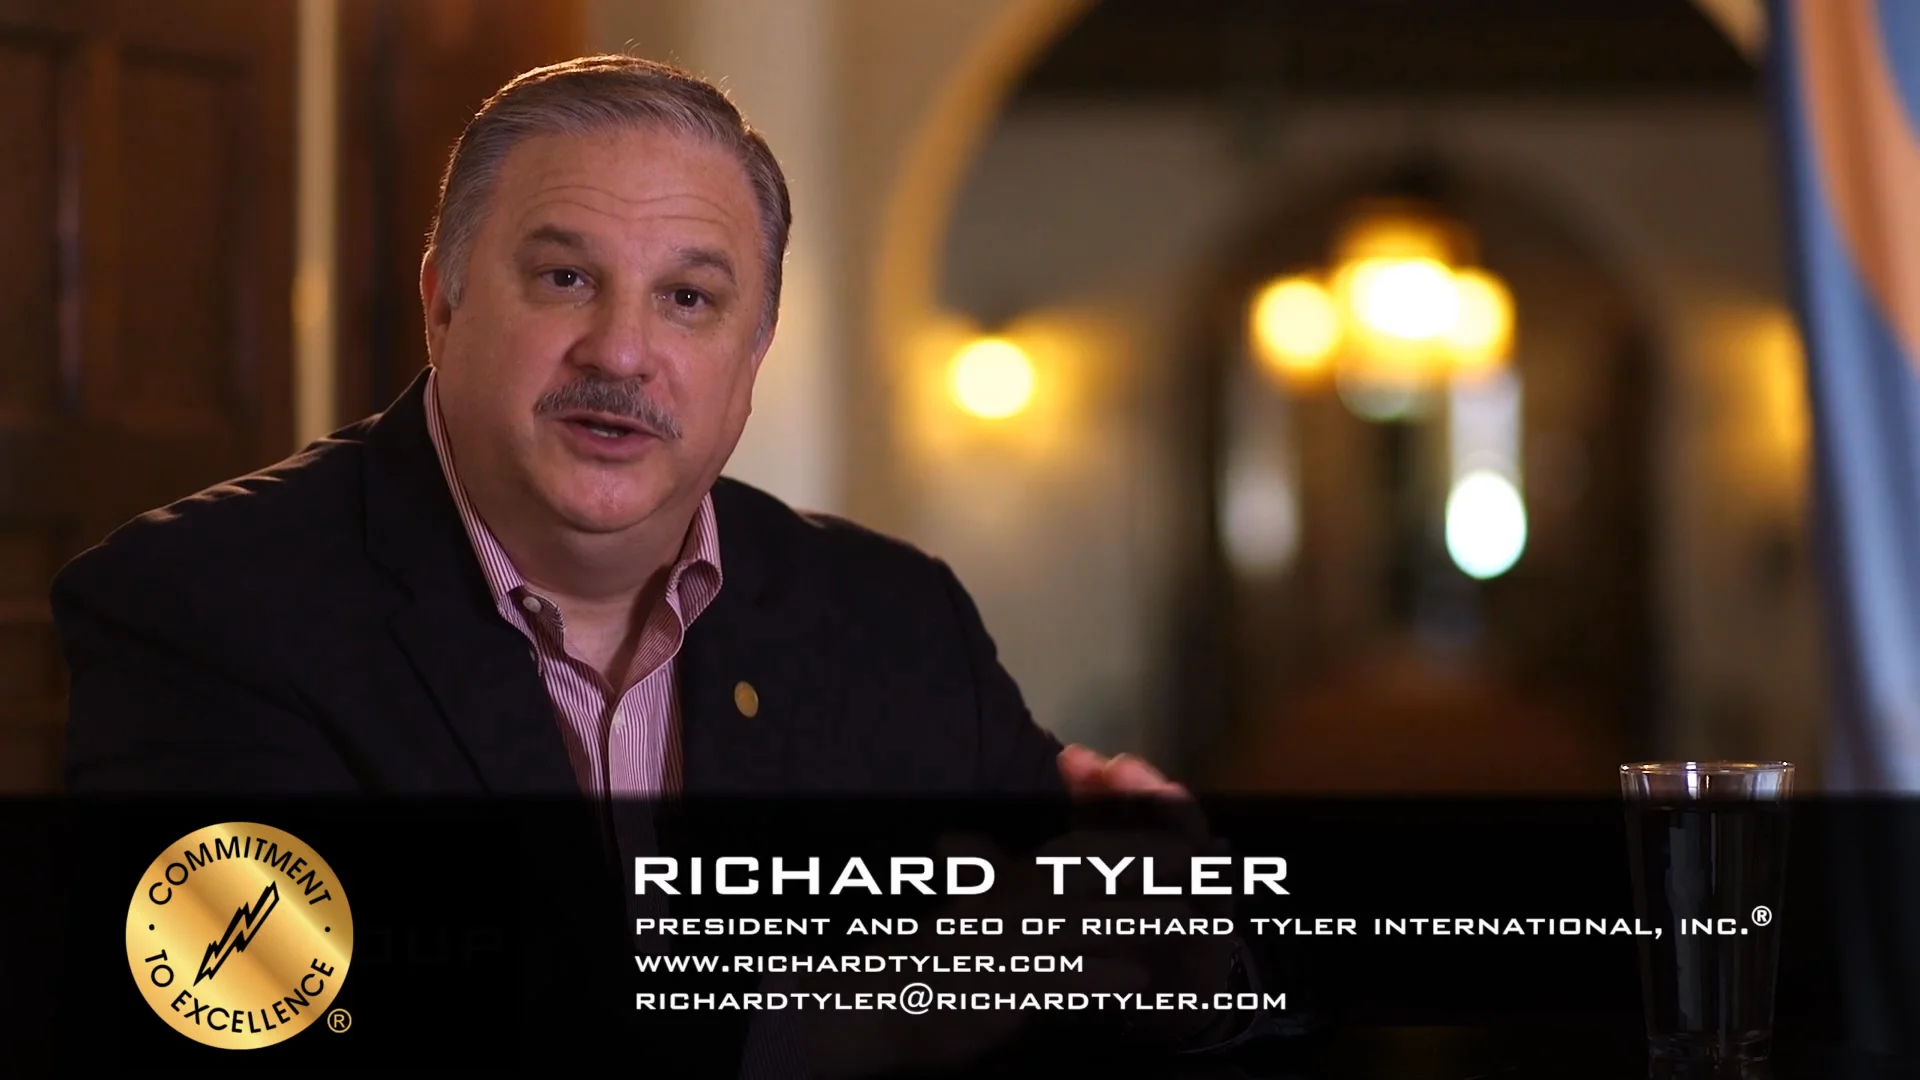 Richard Tyler Discusses the Corporate Overview of Richard Tyler  International, Inc.® on Vimeo